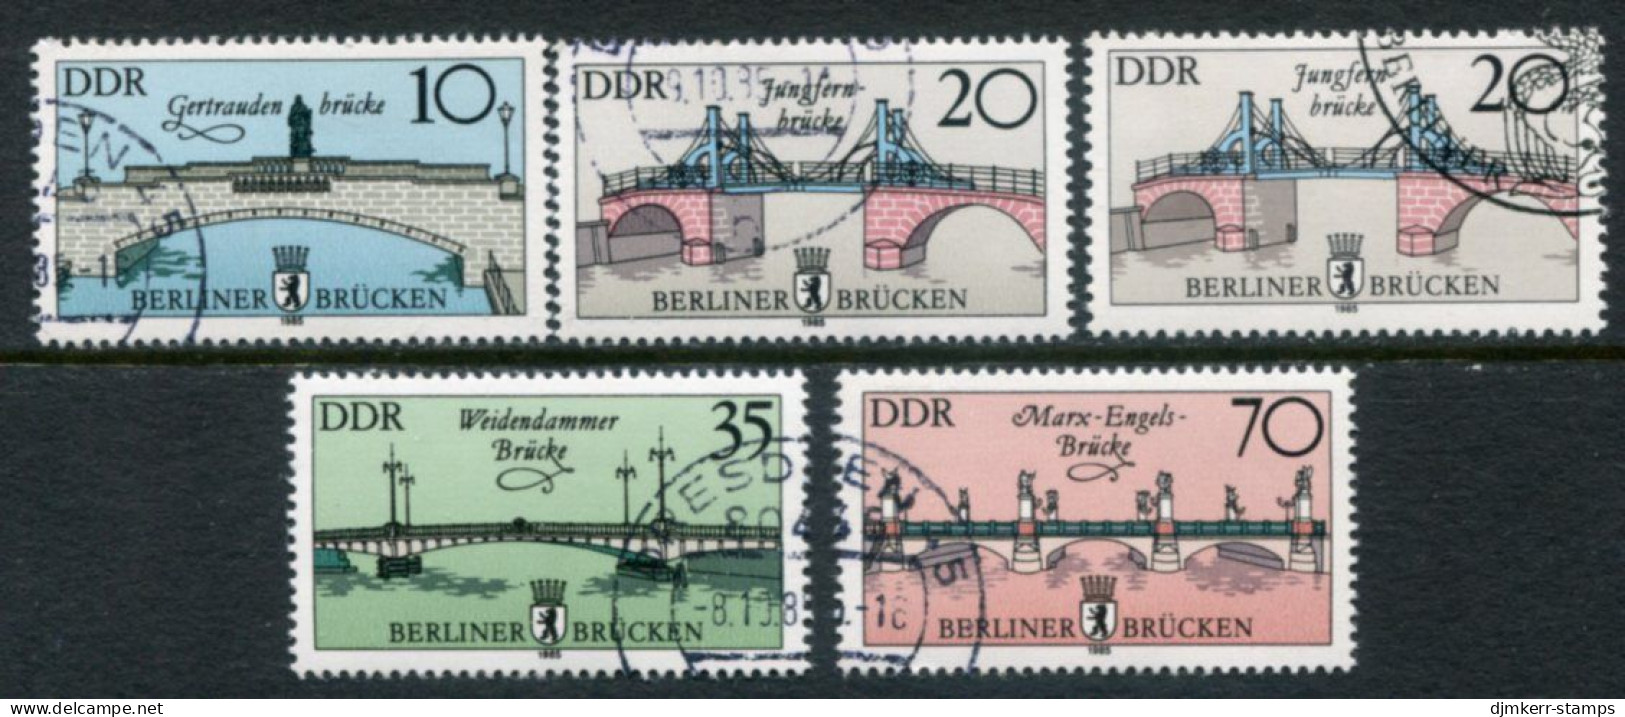 DDR 1985 Berlin Bridges With Both 20 Pf. Used.  Michel 2972-75 - Used Stamps